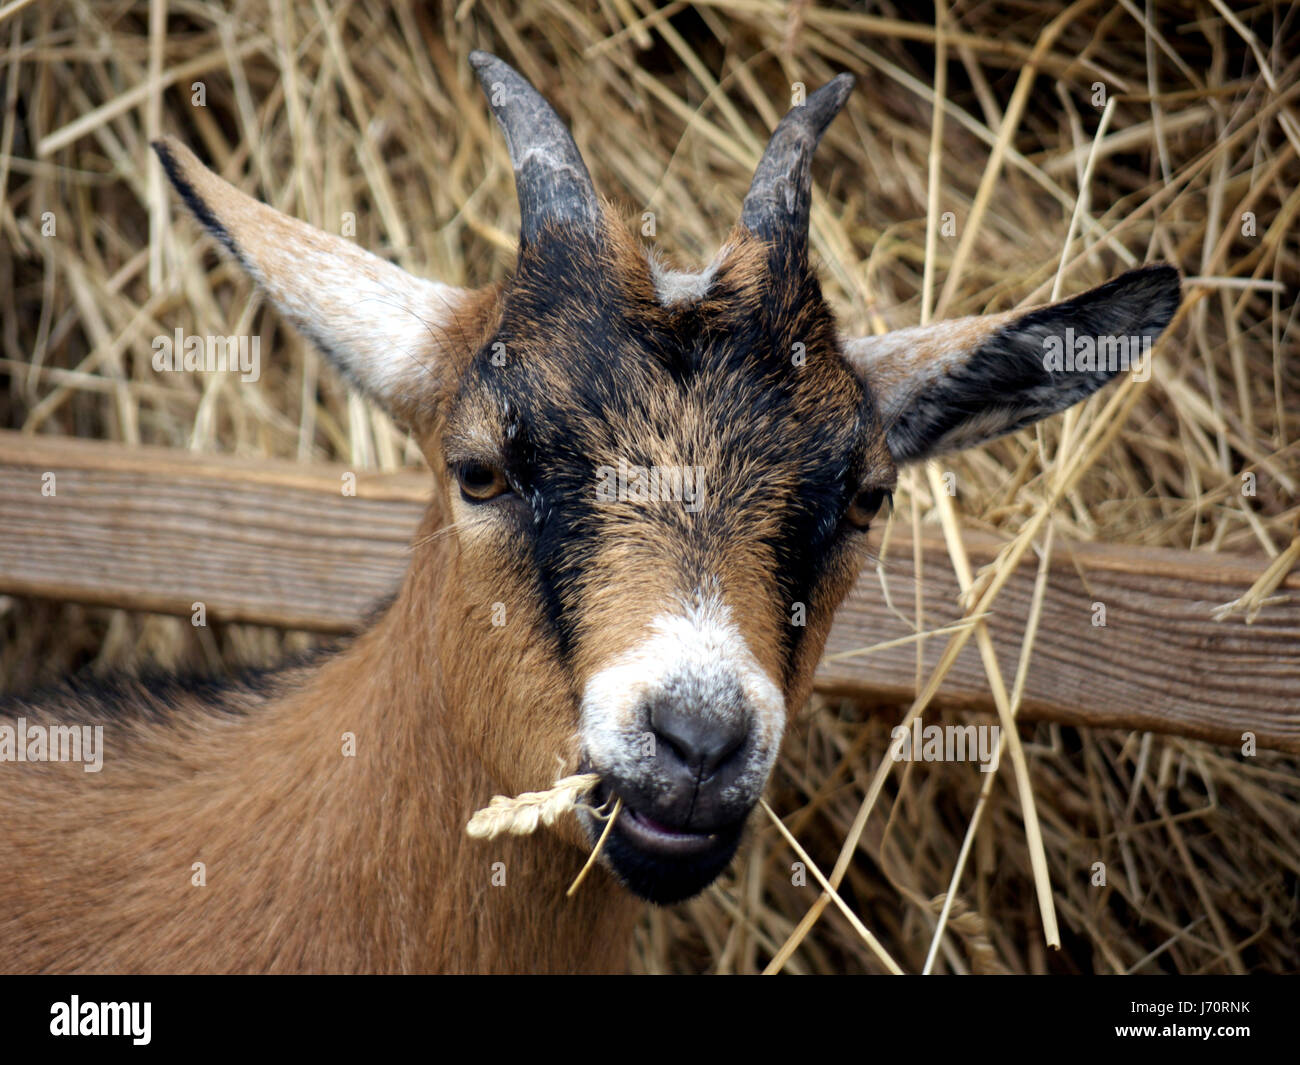 pet goat hay billy goat animal pet mammal goat quadruped creature stable hay Stock Photo